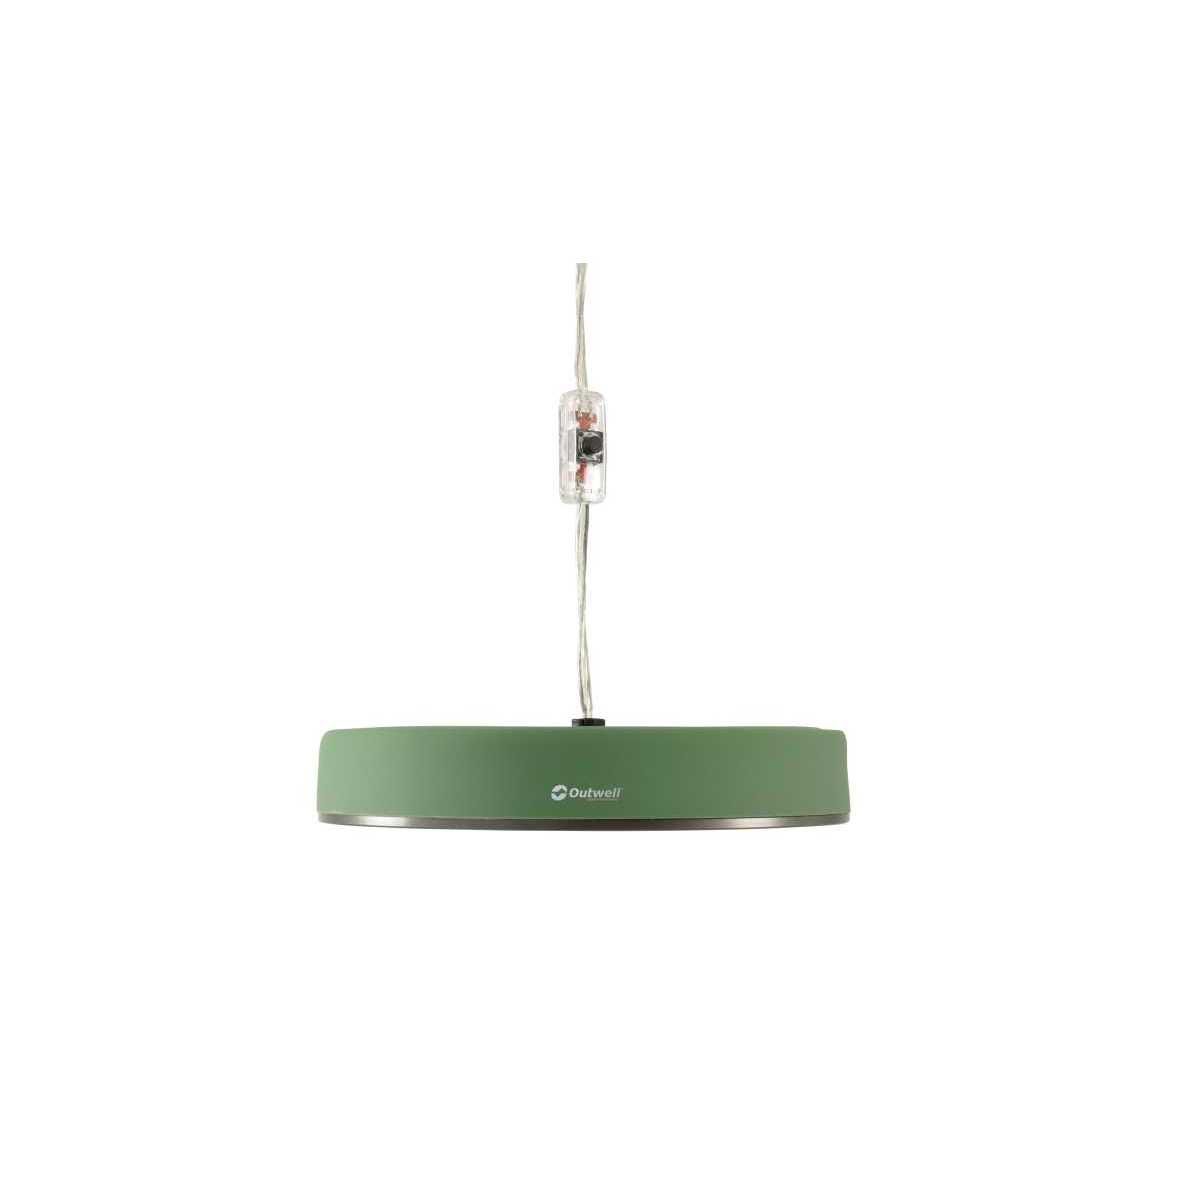 Outwell Sargas Lux LED-Haengeleuchte 230V Shadow Green - 651246